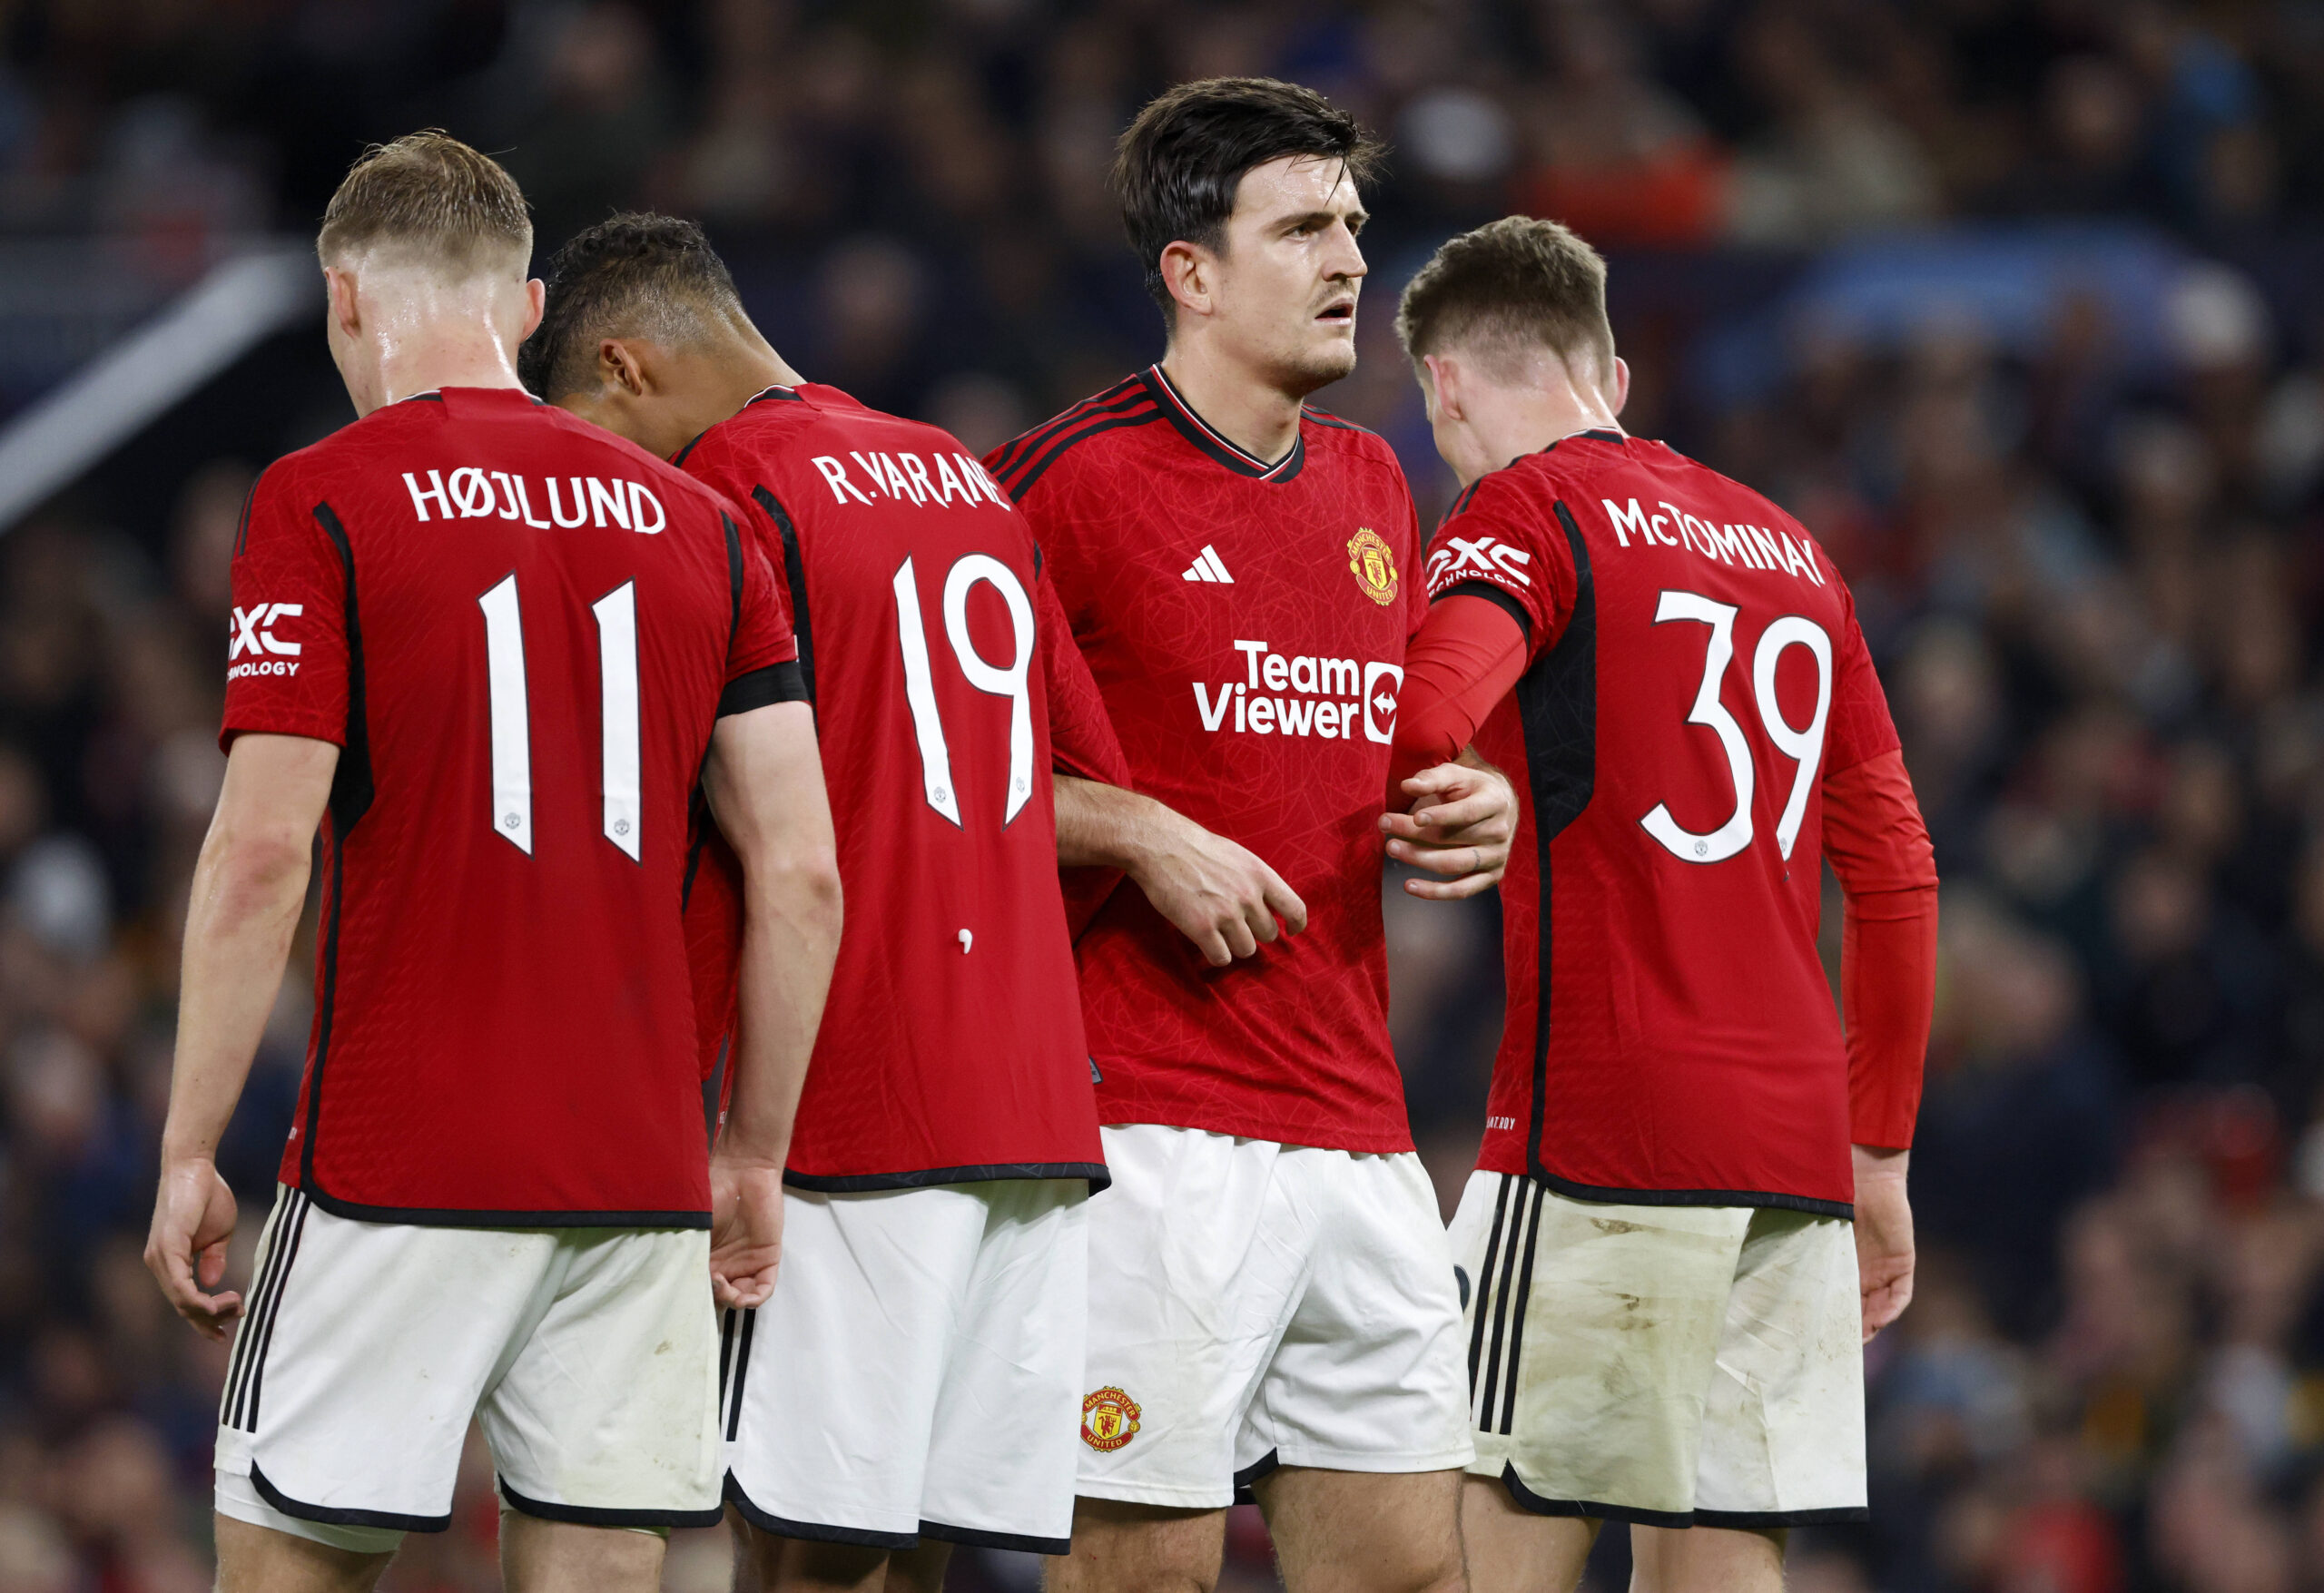 Manchester United defense forms a wall to block a free kick